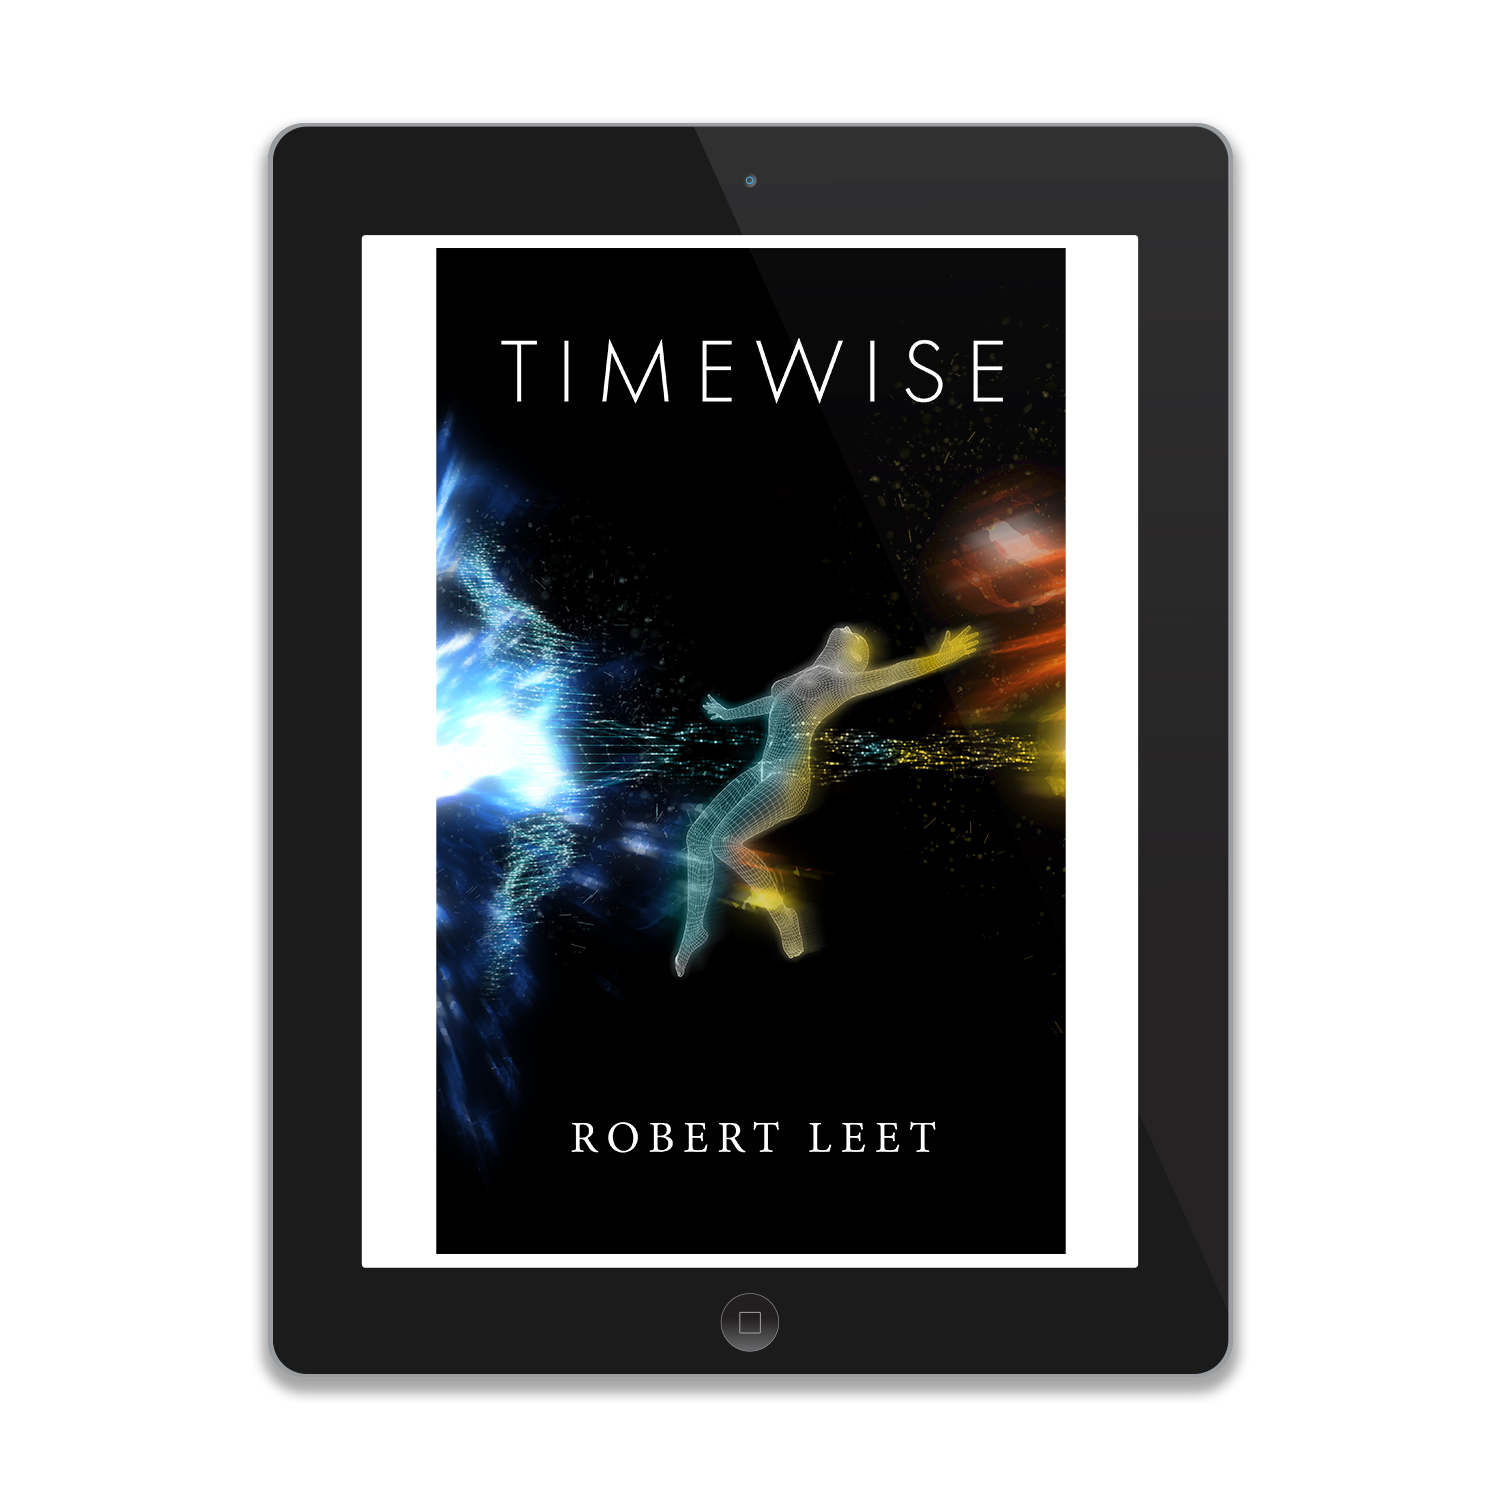 'Timewise' is temporally-fractured scifi novel by author Robert Leet. The book cover was designed by Mark Thomas, of coverness.com. To find out more about my book design services, please visit www.coverness.com.